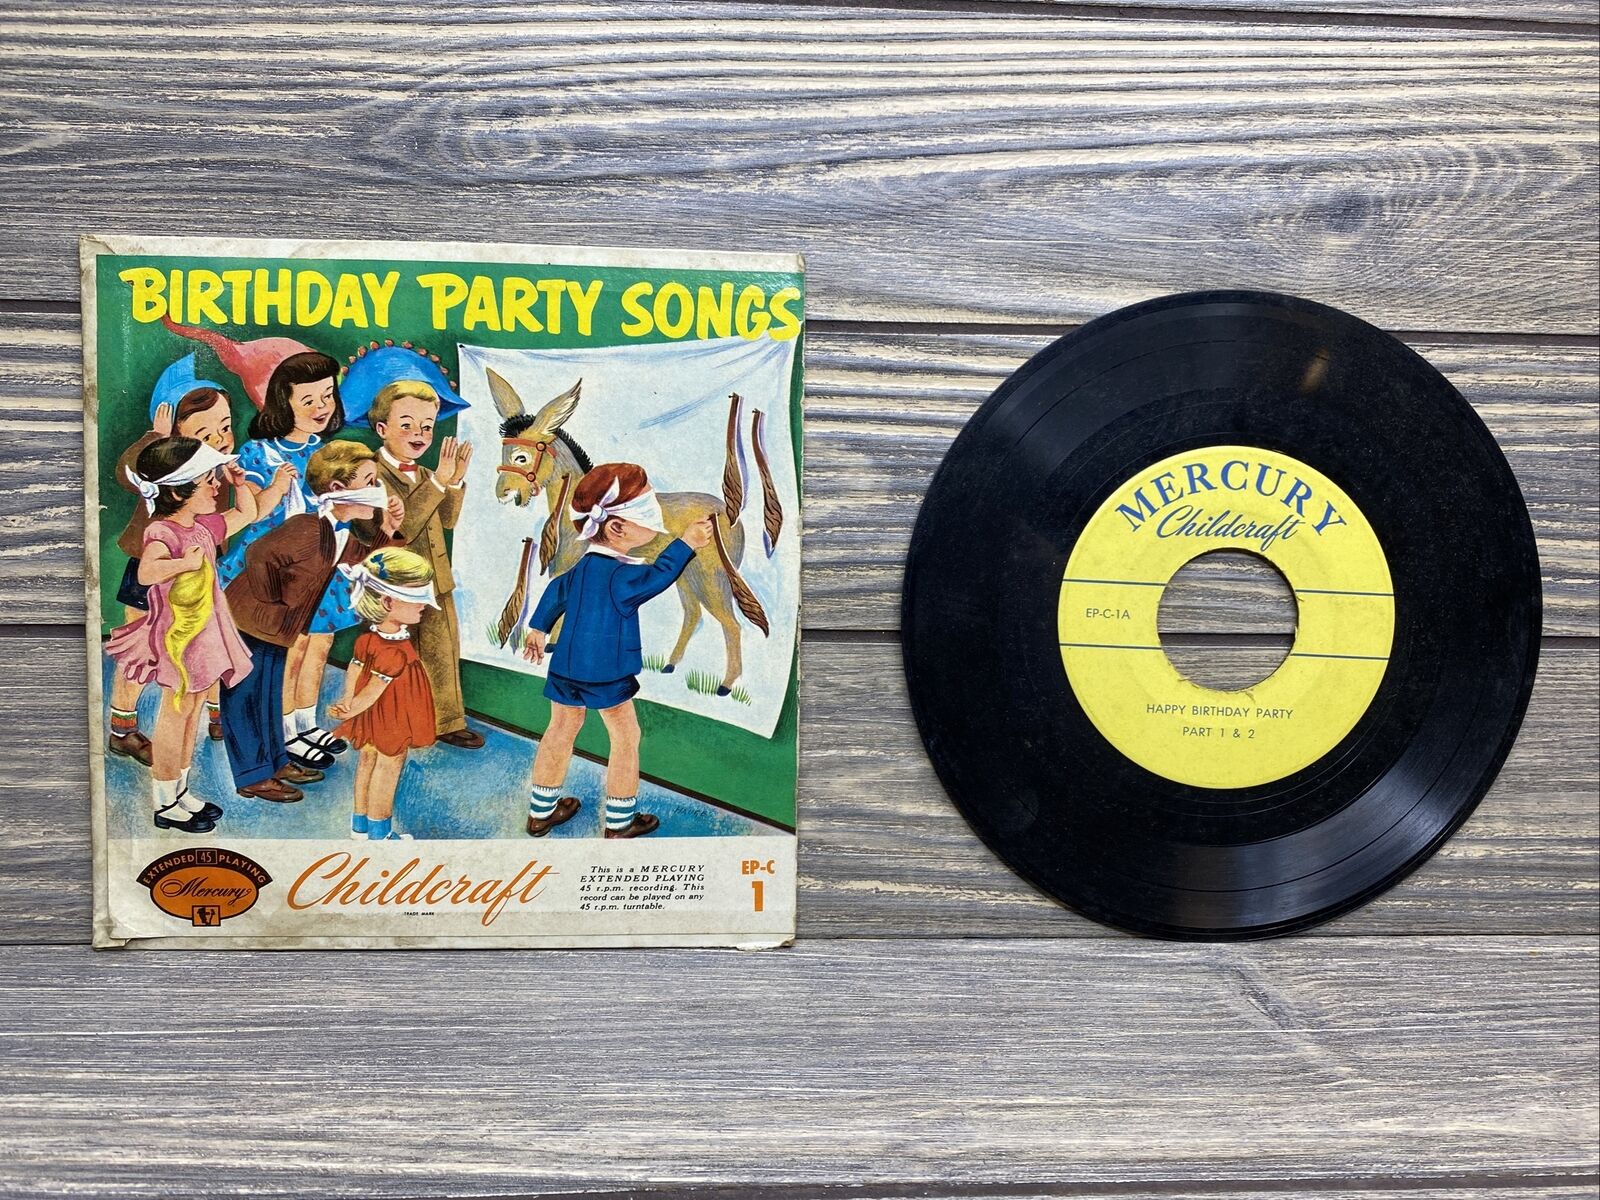 Vintage Mercury Childcraft Record Birthday Party and Sidewalk Songs 45rpm